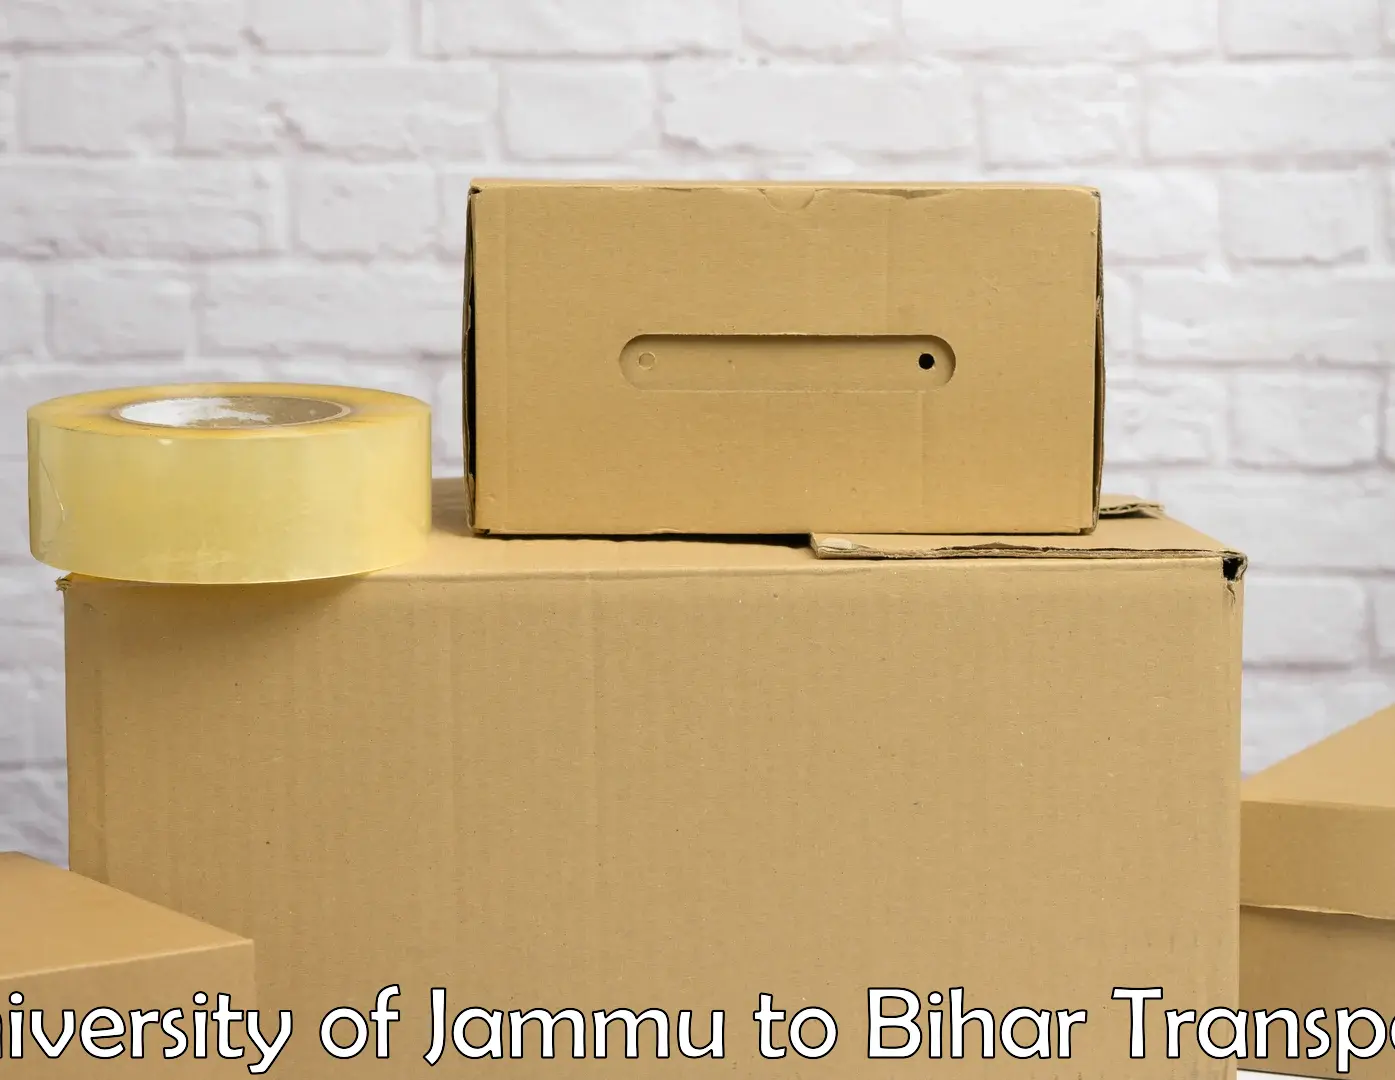 Container transportation services University of Jammu to Hajipur